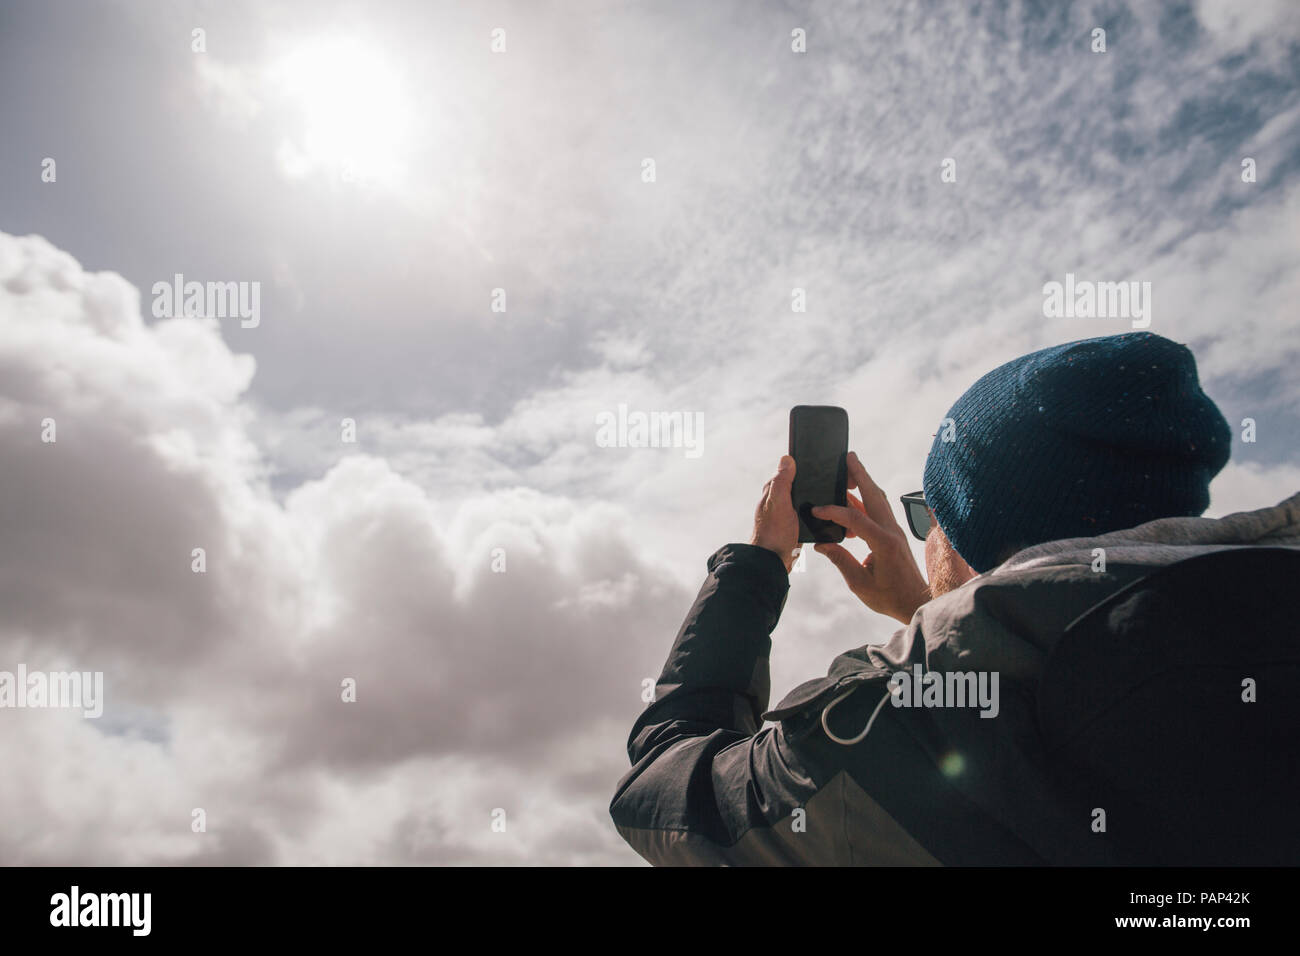 Man holding up cell phone under sunny sky with clouds Stock Photo